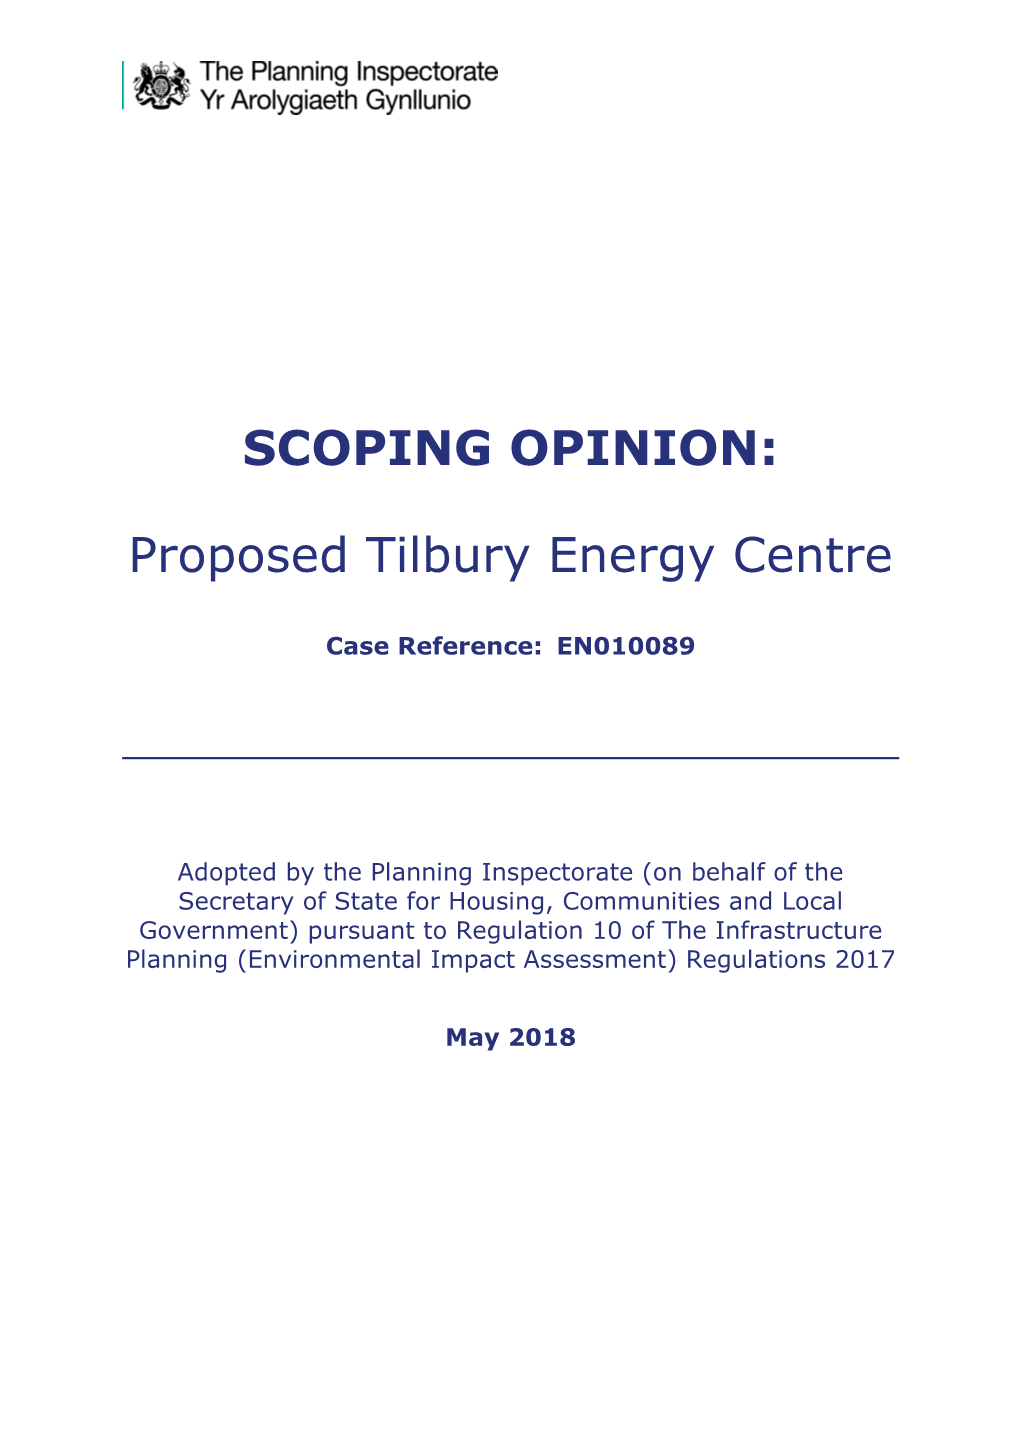 SCOPING OPINION: Proposed Tilbury Energy Centre